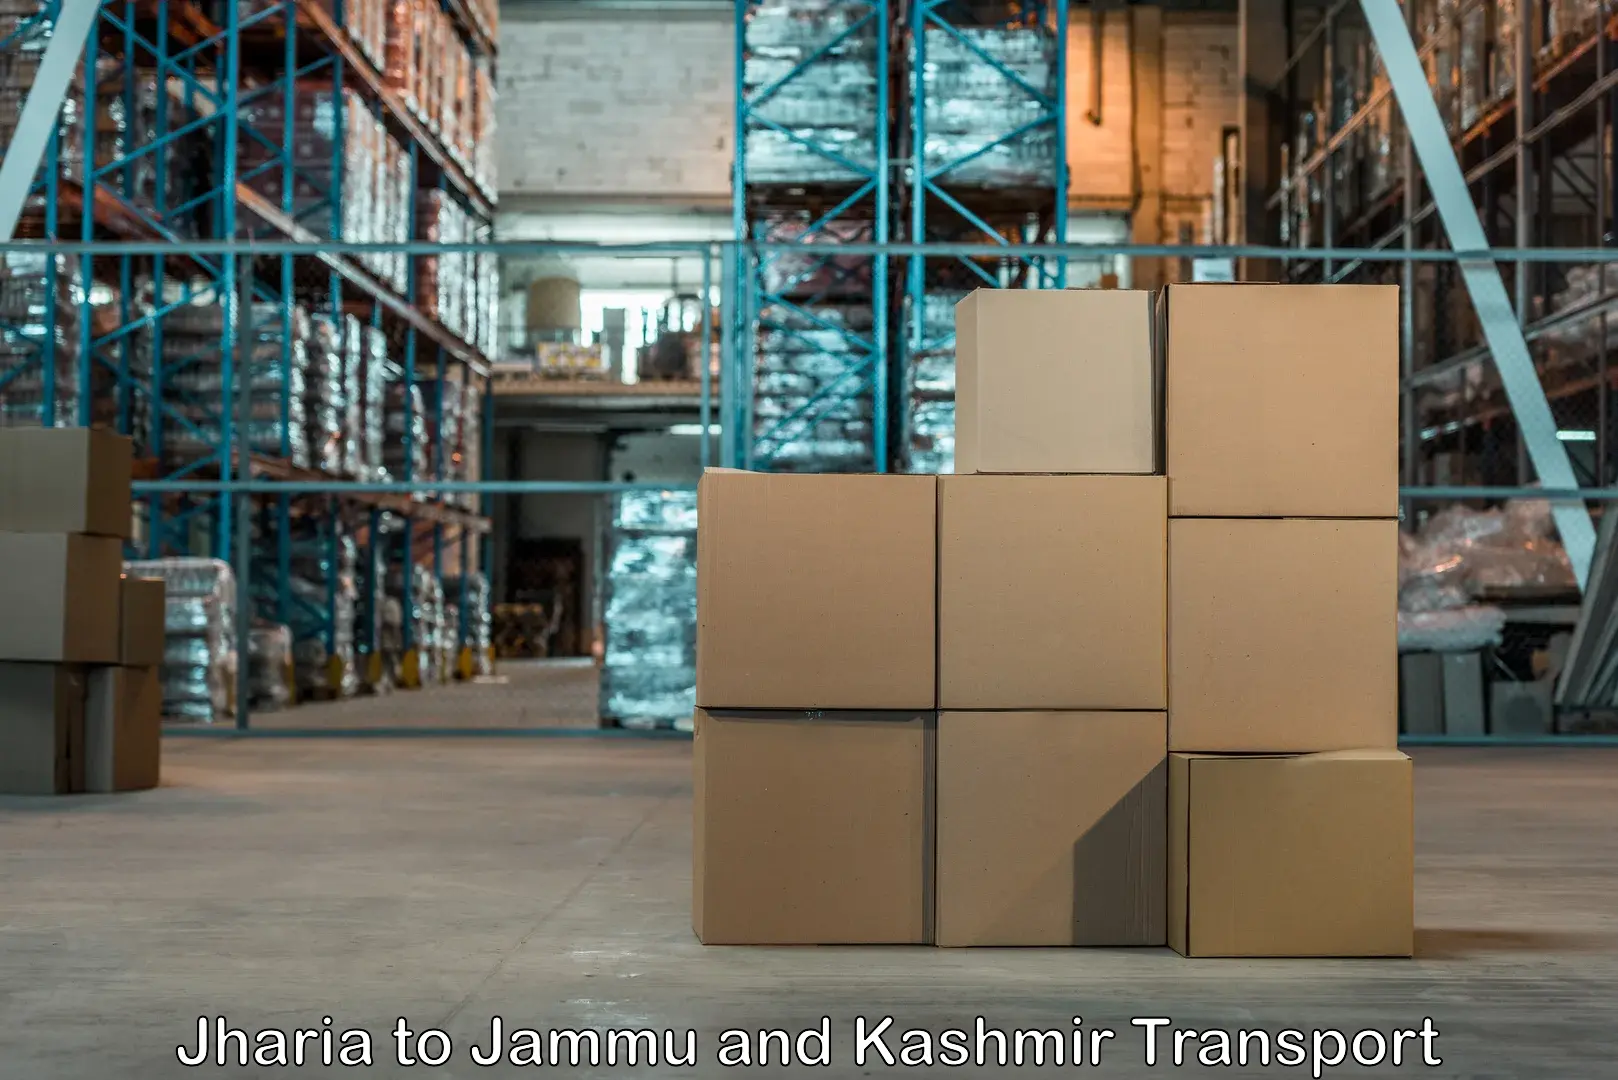 Truck transport companies in India Jharia to Jammu and Kashmir